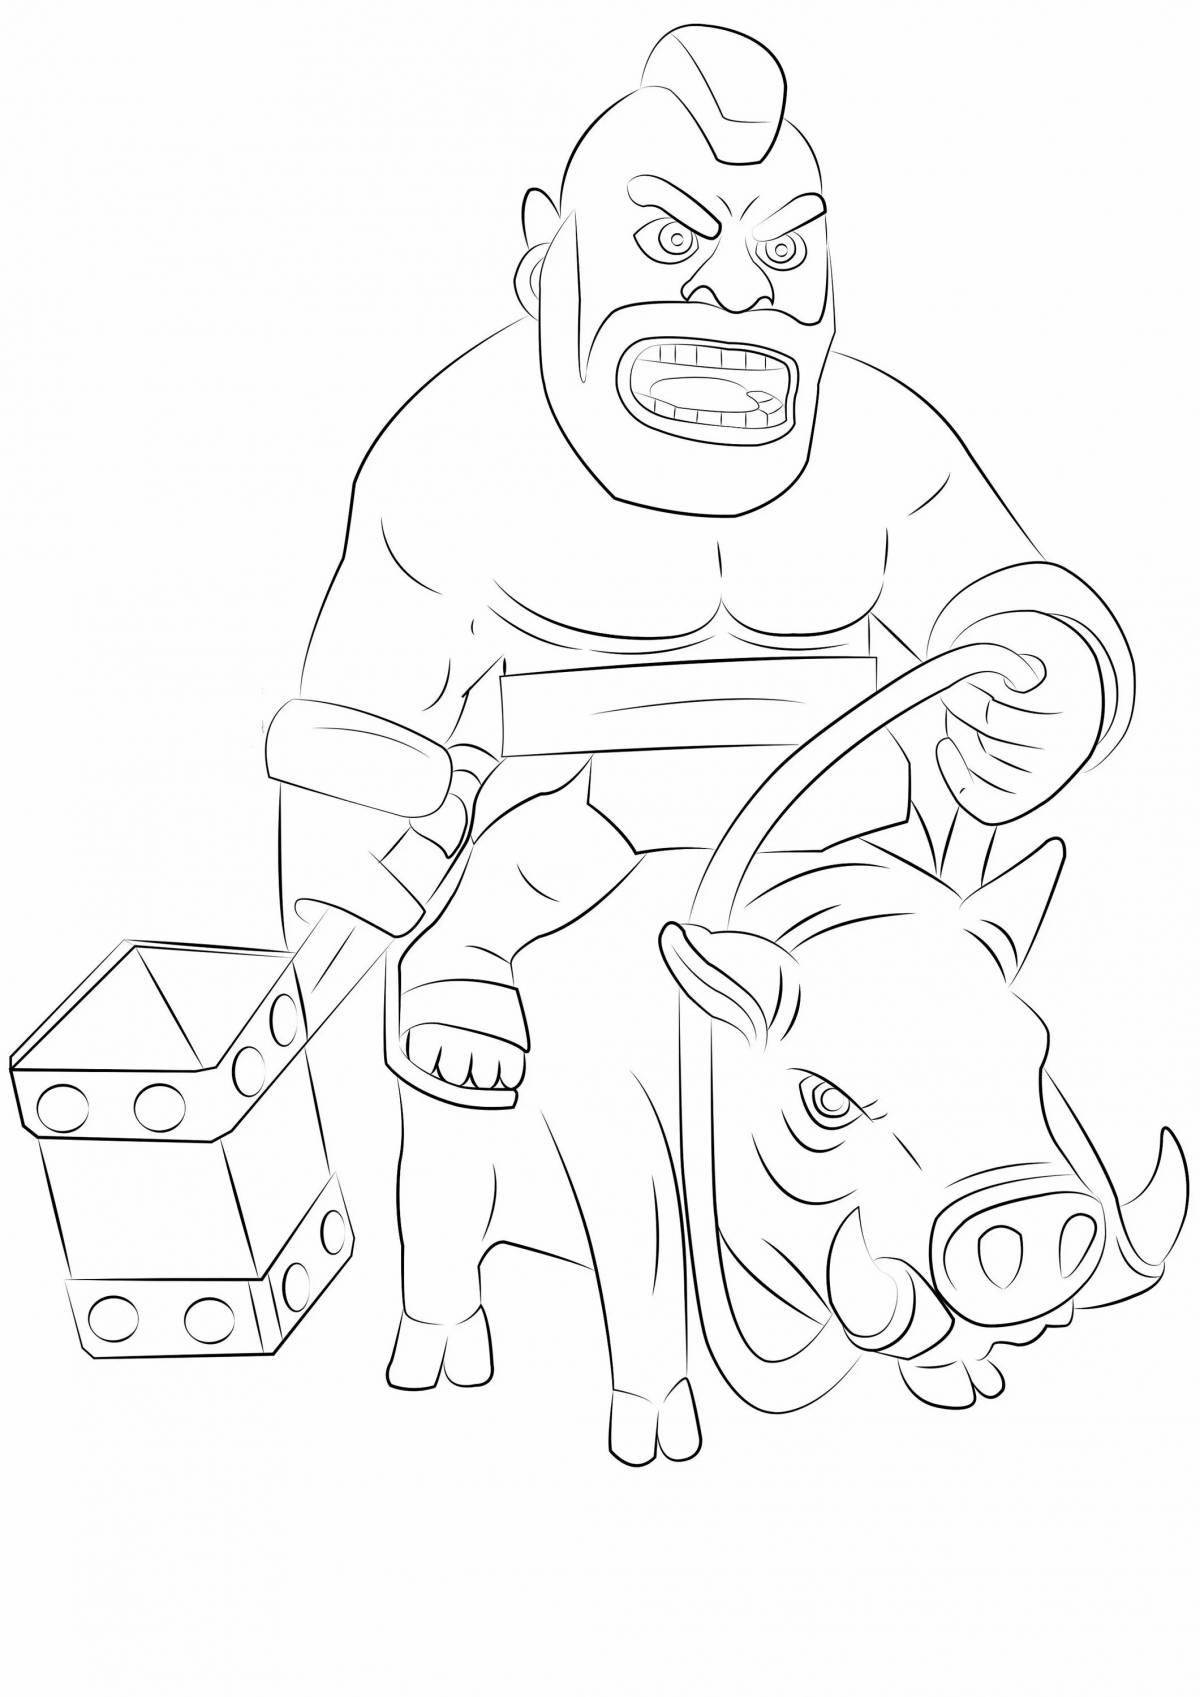 Majestic clash of clans coloring page